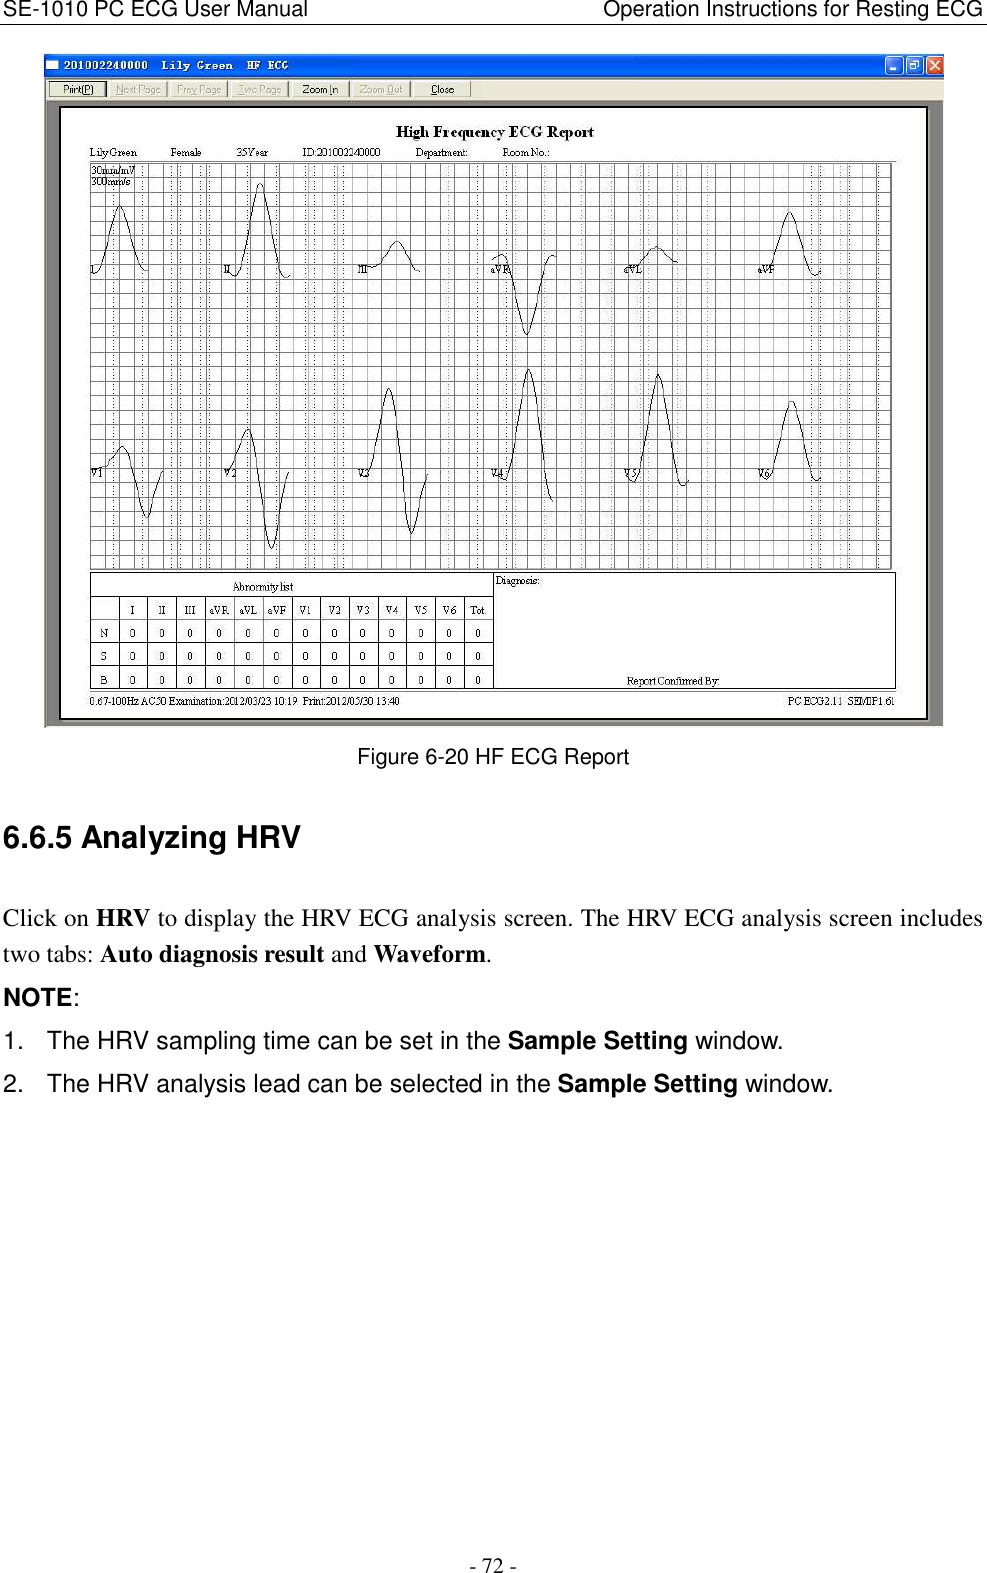 SE-1010 PC ECG User Manual                                                      Operation Instructions for Resting ECG - 72 -  Figure 6-20 HF ECG Report 6.6.5 Analyzing HRV Click on HRV to display the HRV ECG analysis screen. The HRV ECG analysis screen includes two tabs: Auto diagnosis result and Waveform. NOTE: 1.  The HRV sampling time can be set in the Sample Setting window. 2.  The HRV analysis lead can be selected in the Sample Setting window. 